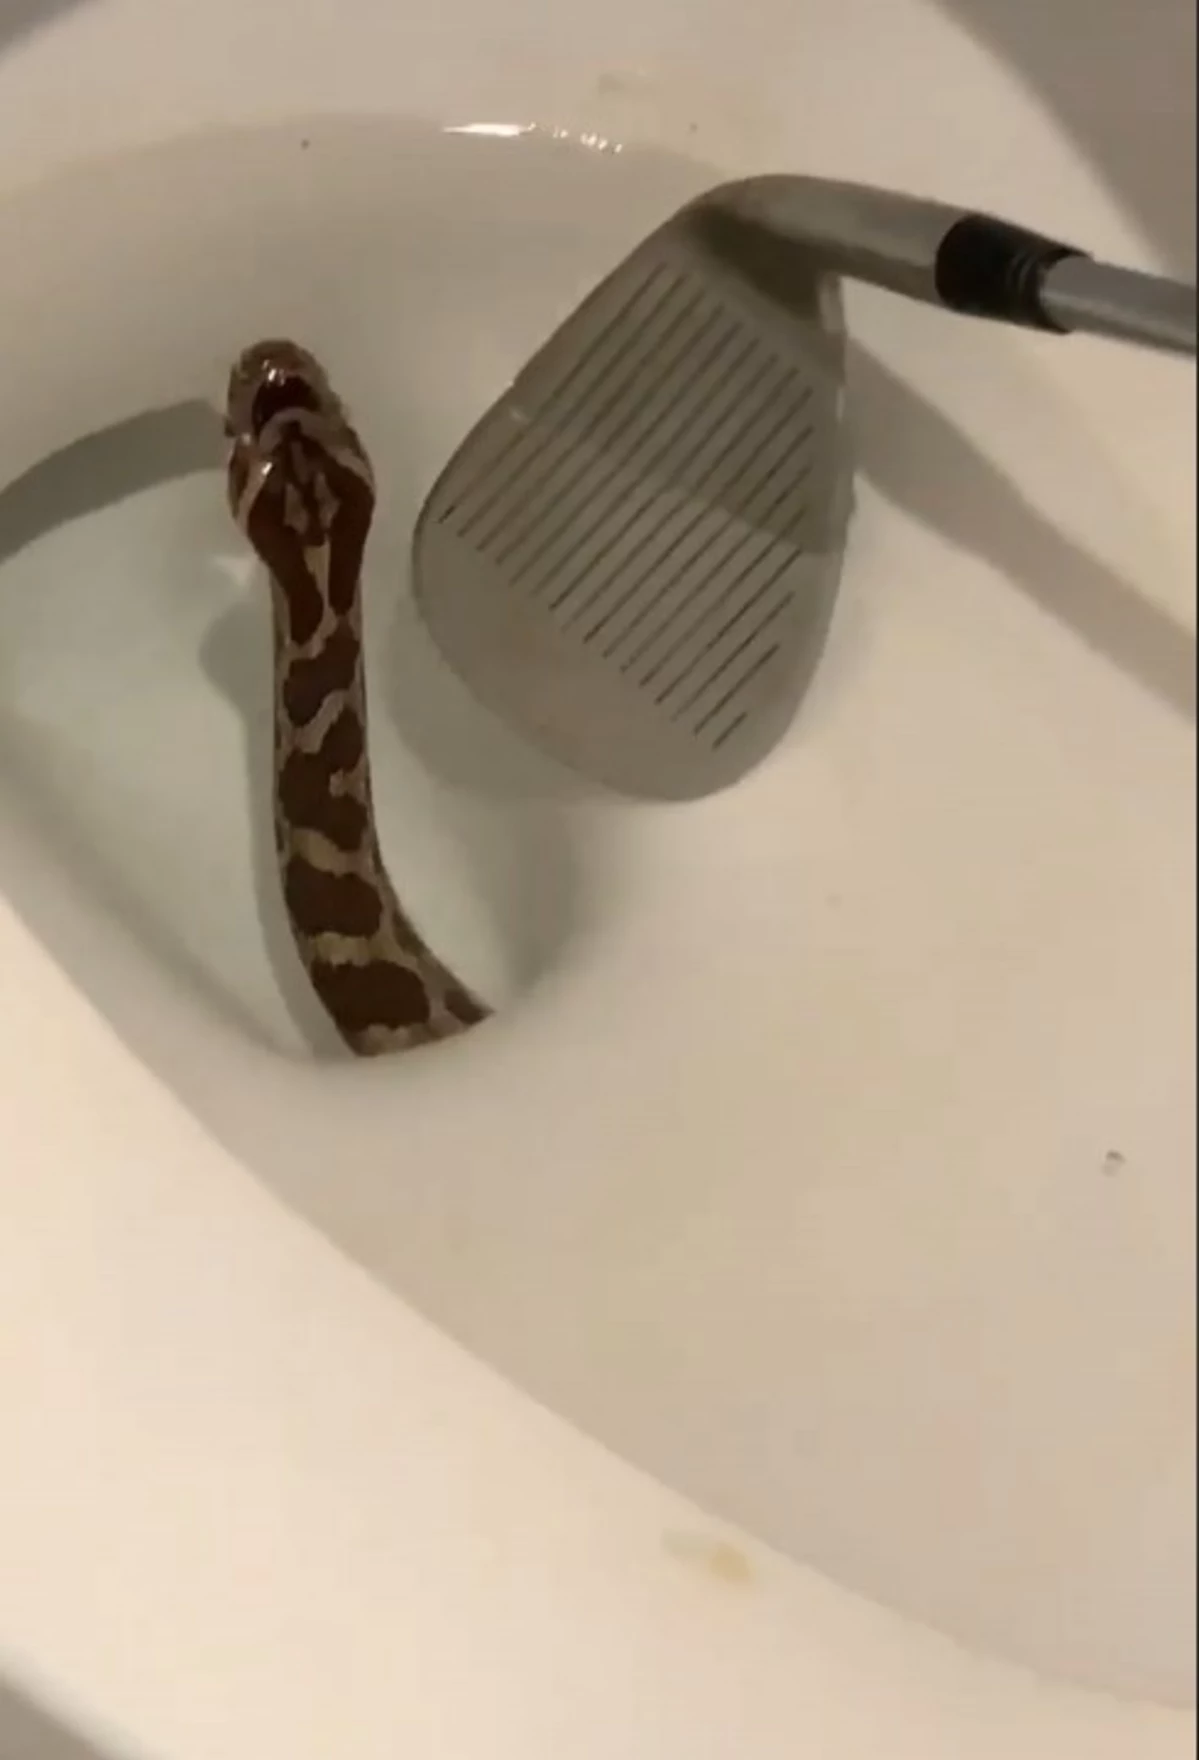 Texas Woman Finds Snake Emerging From Toilet in Middle of Night